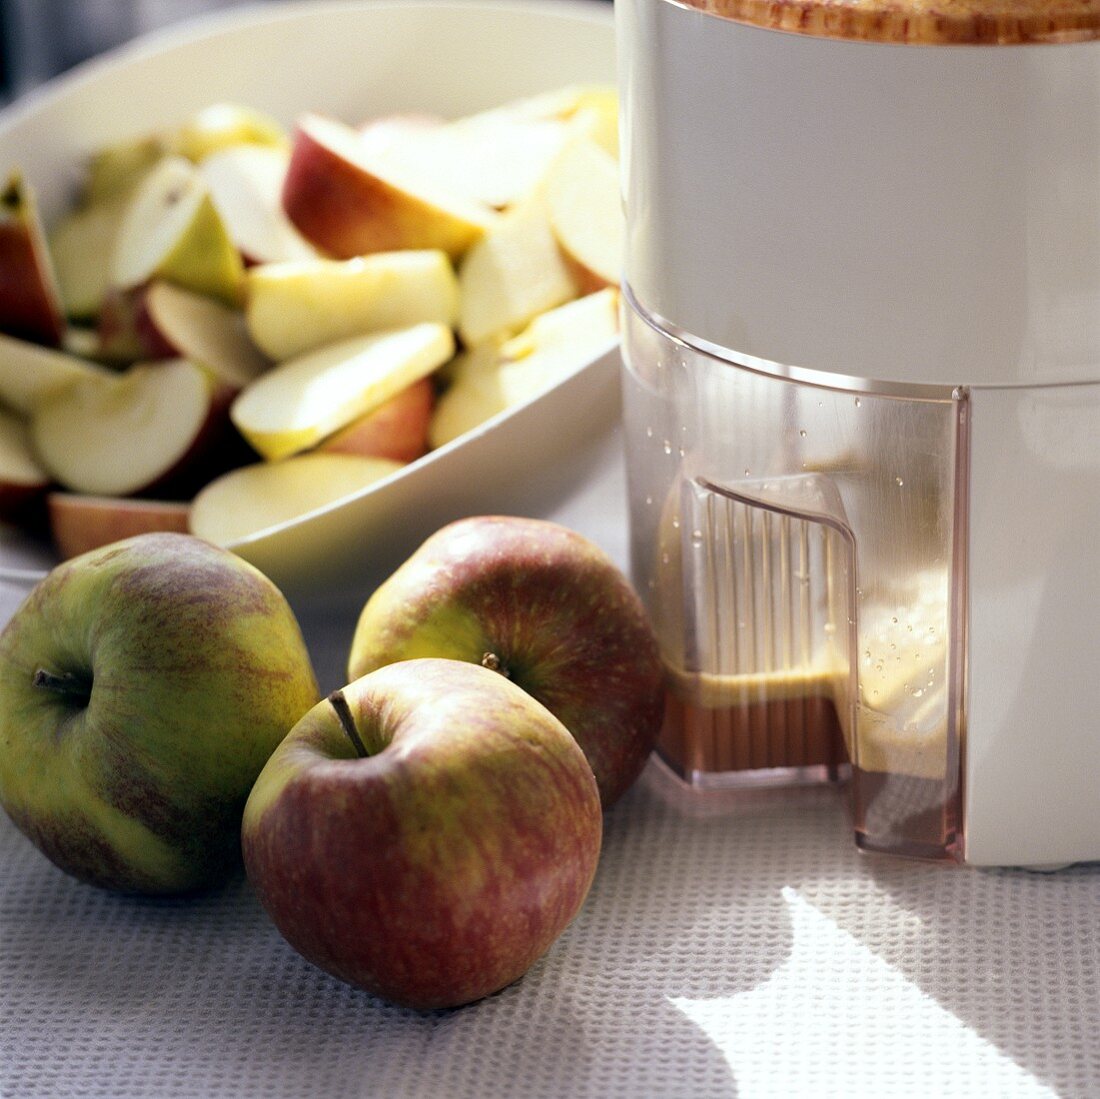 Making home-made apple juice